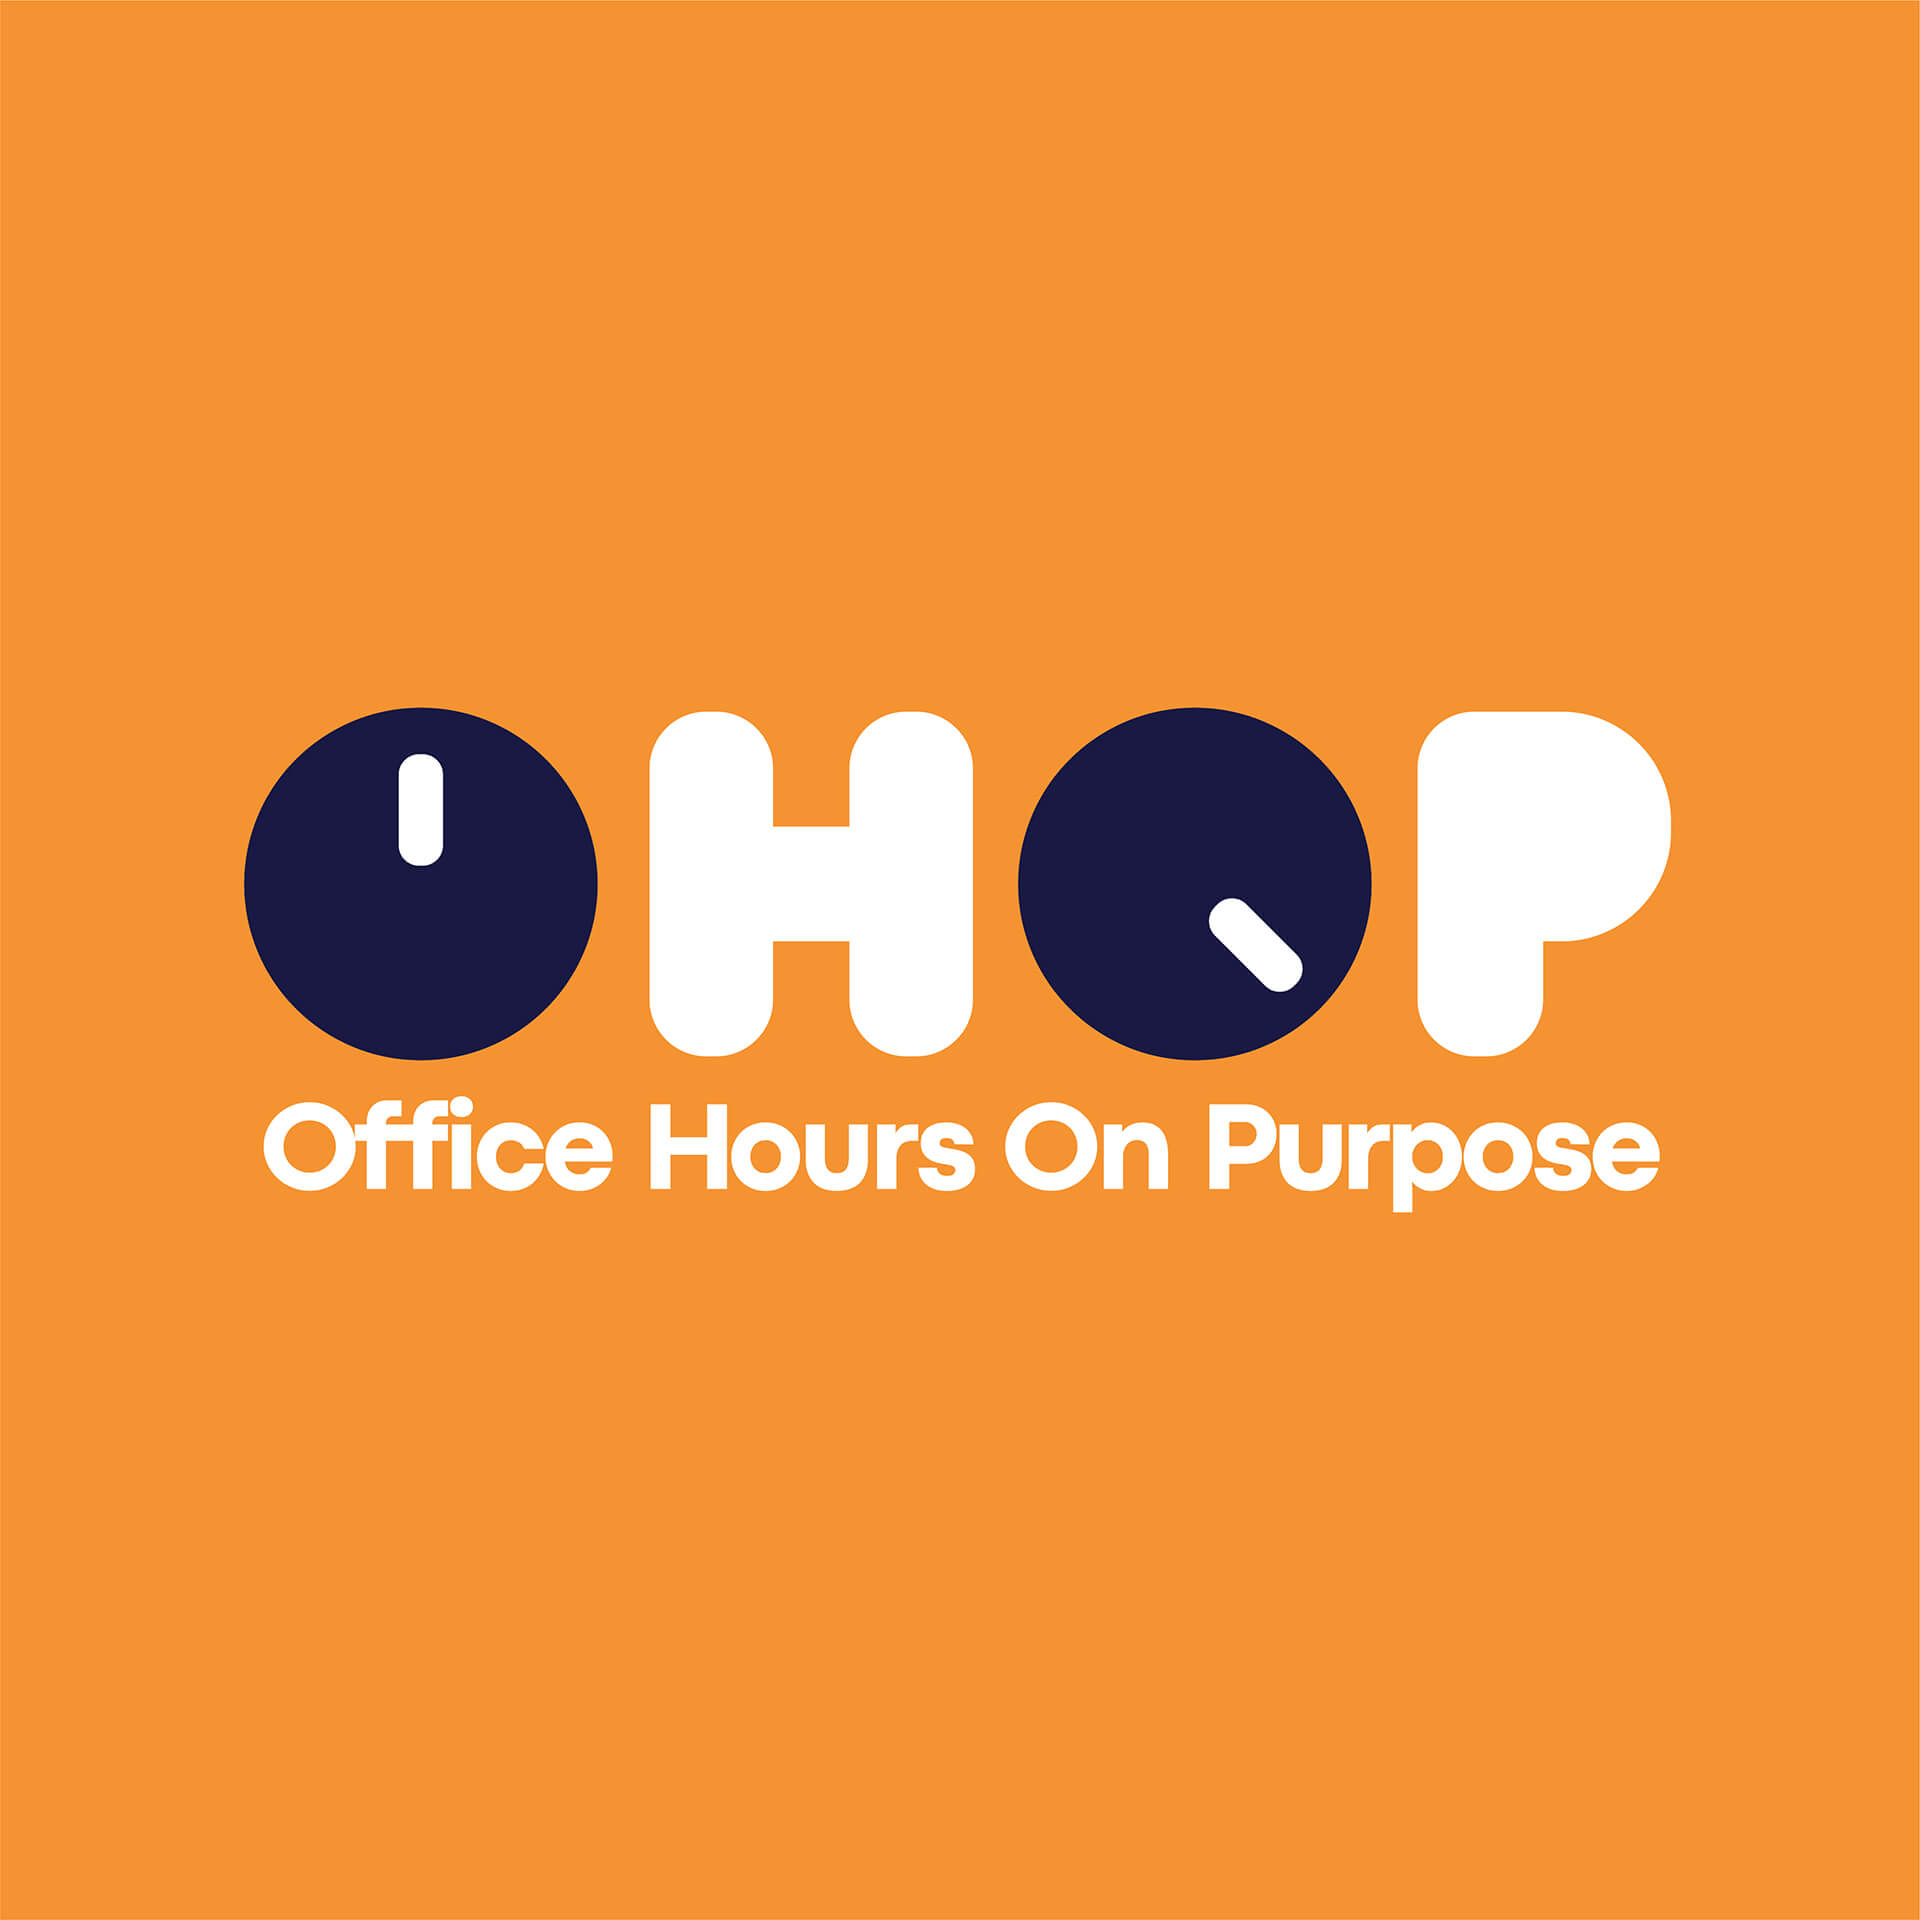 OHOP: Office Hours On Purpose